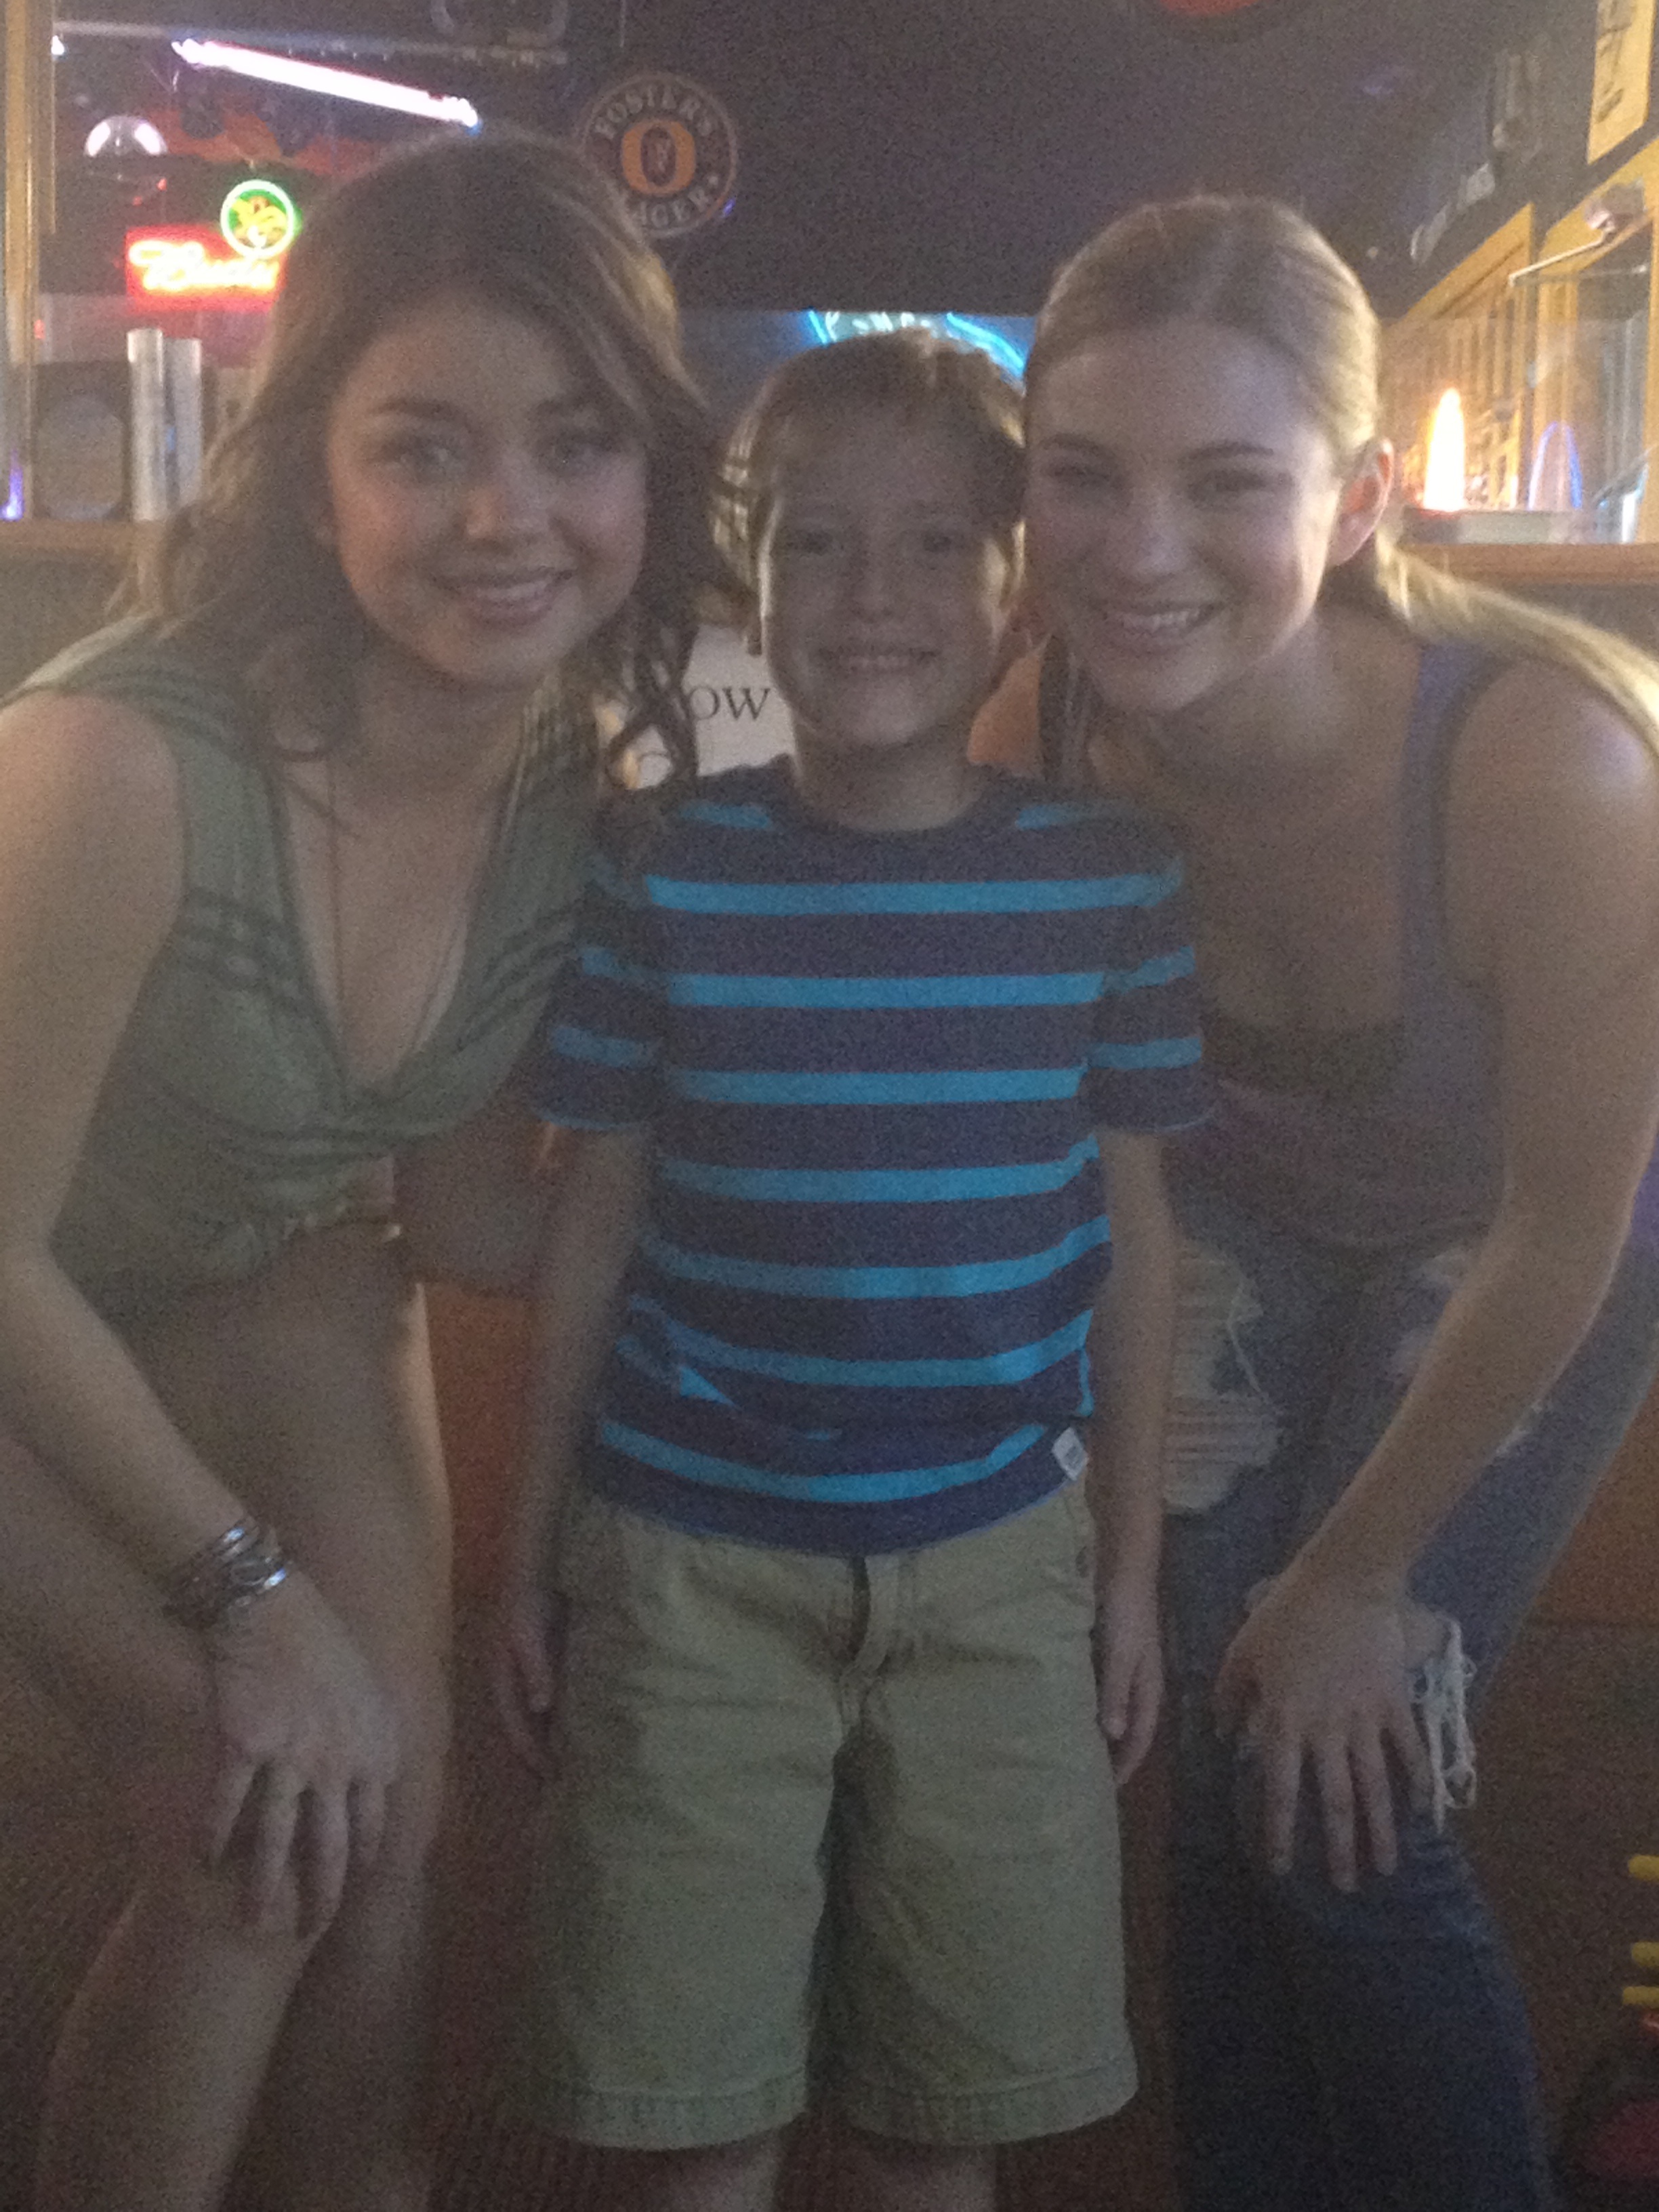 Workin' it on set with Sarah Hyland and Allie Gonino See You in Valhalla